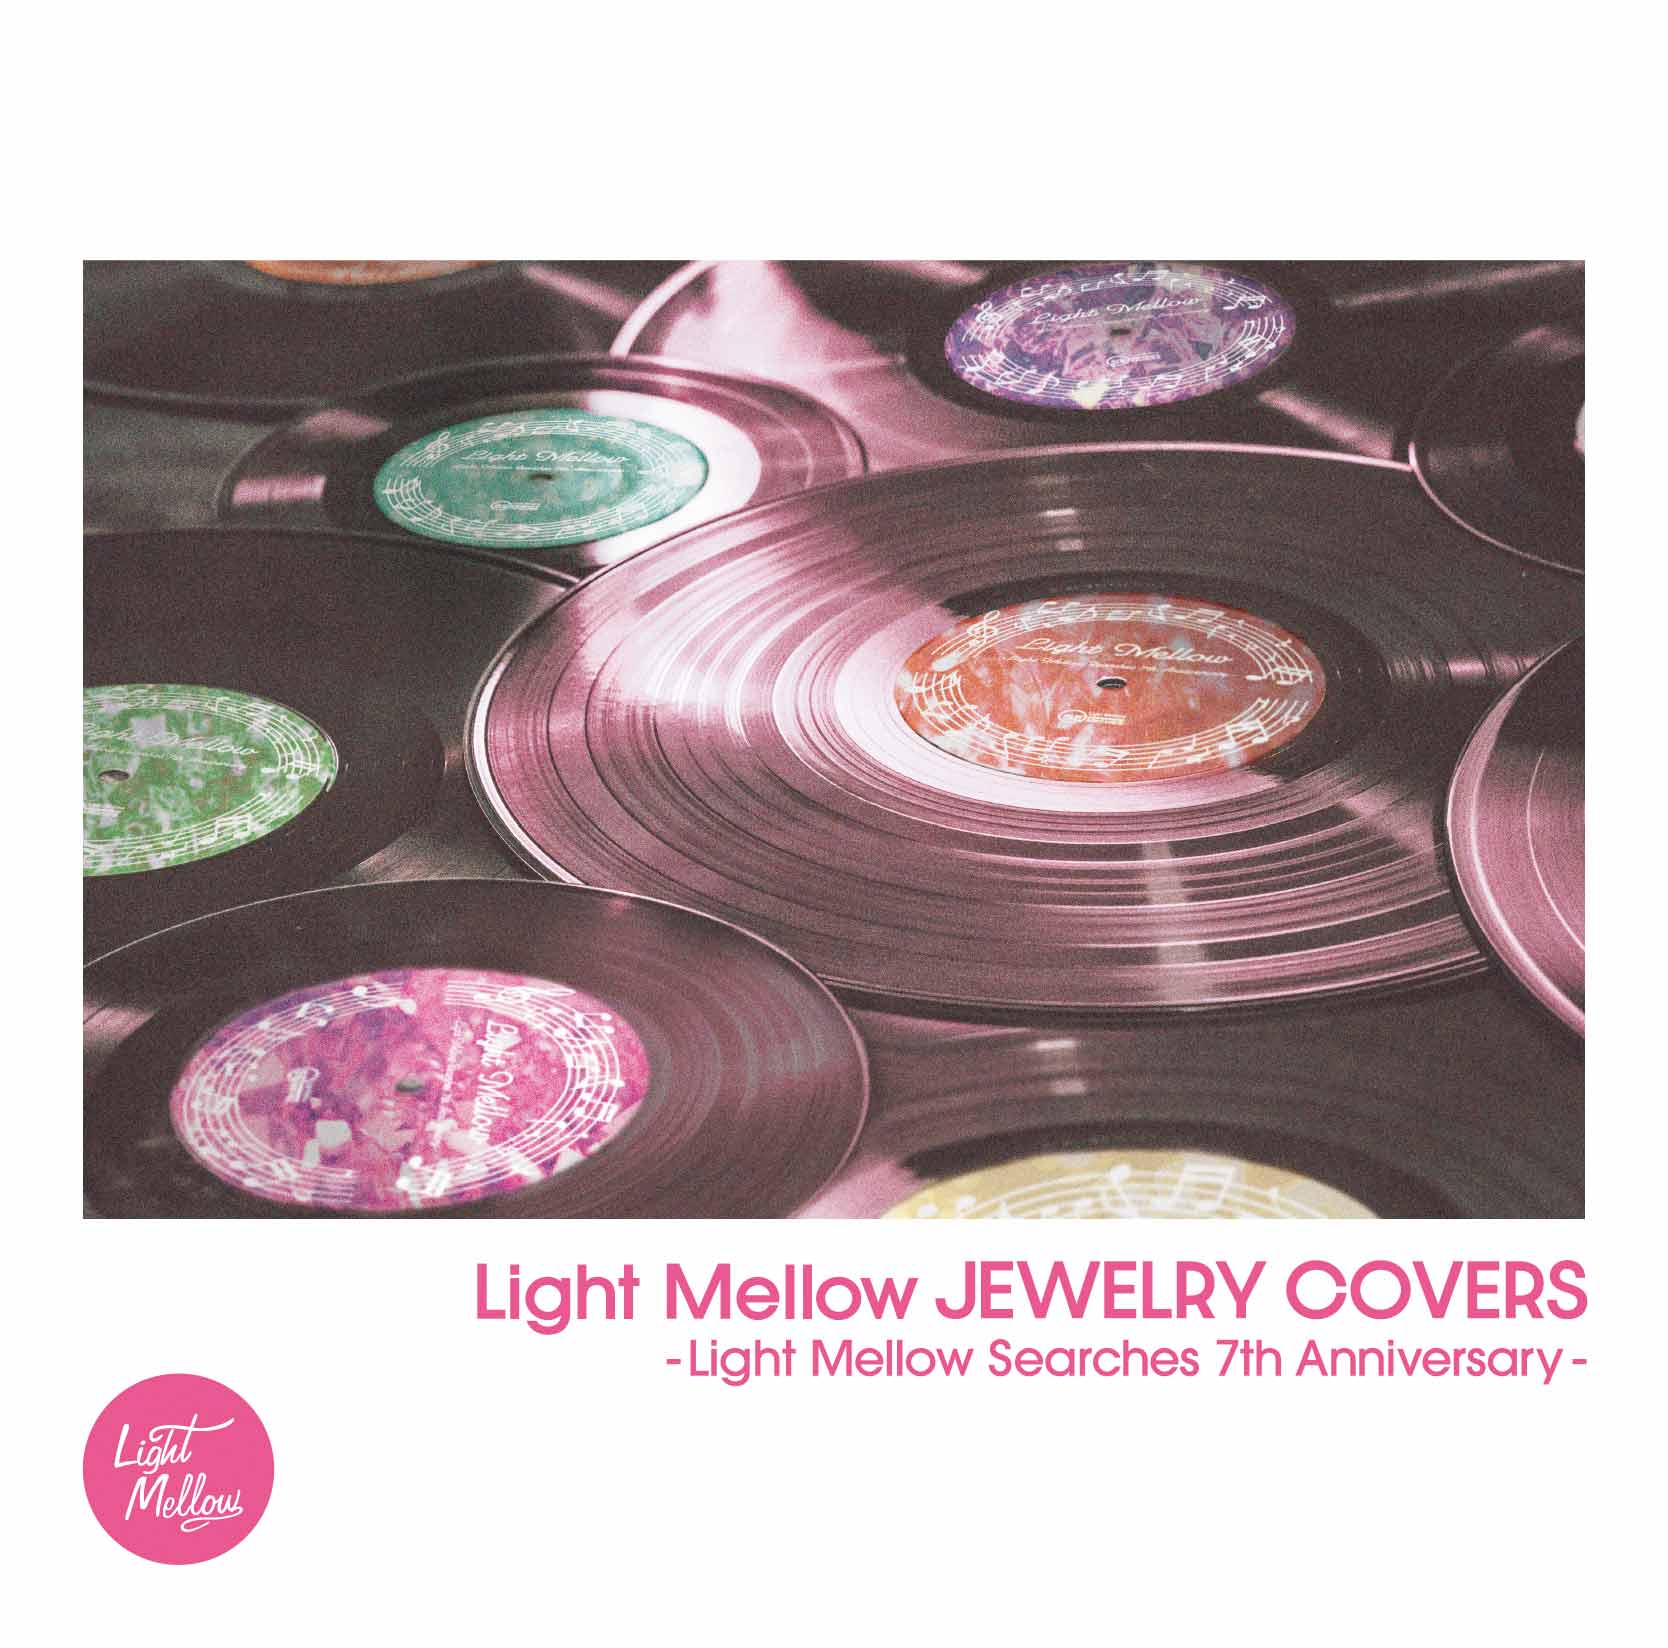 Light Mellow JEWELRY COVERS - Light Mellow Searches 7th Anniversary -